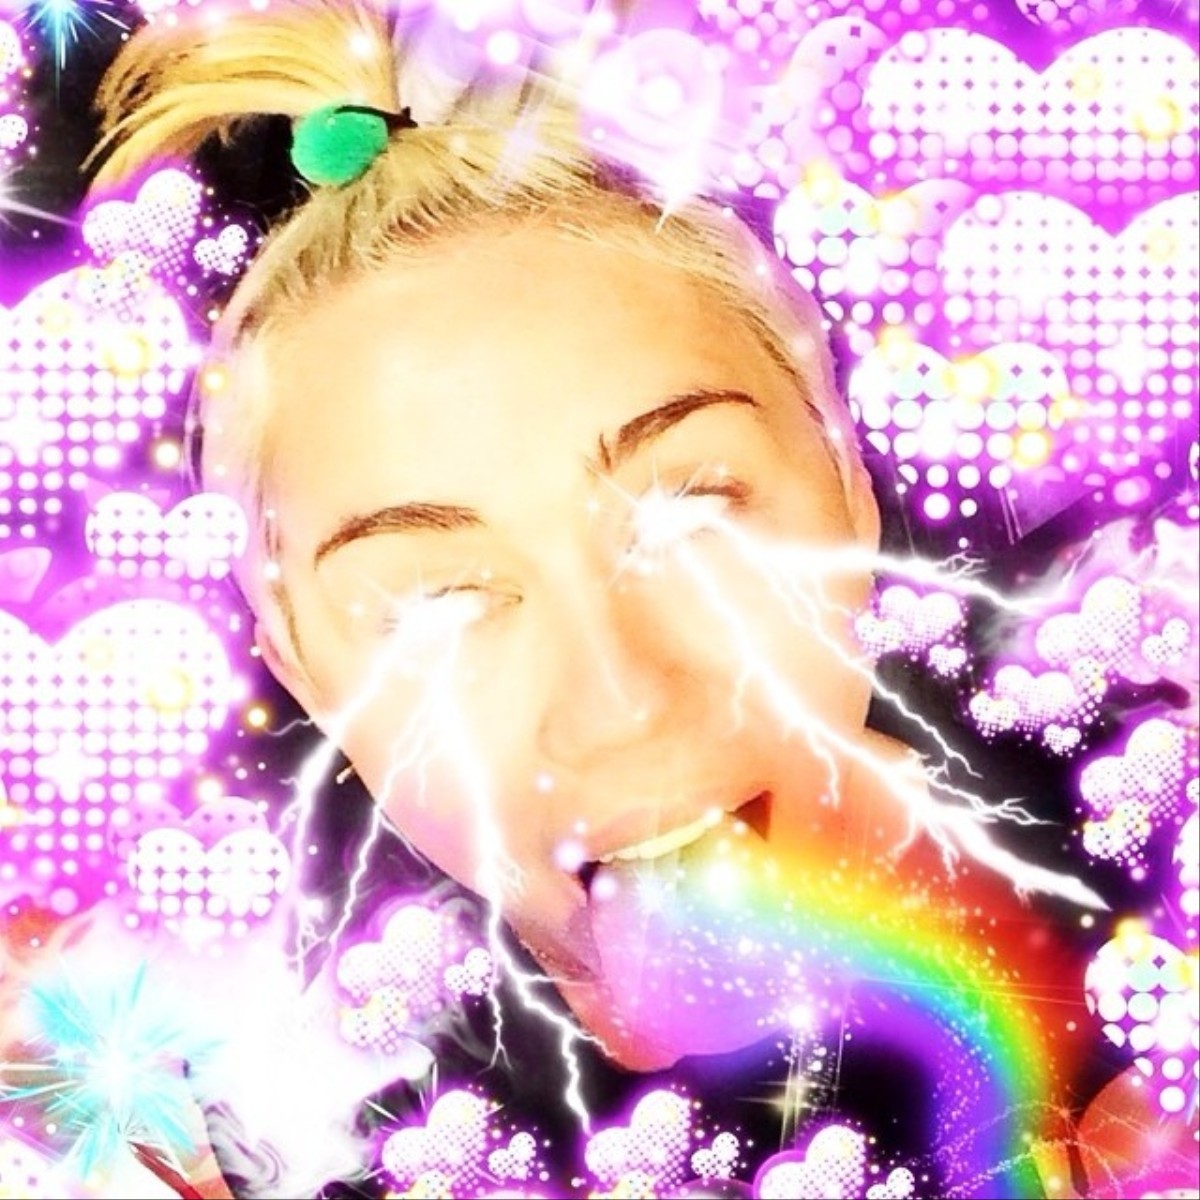 Miley Cyrus Tits Cum - Miley Cyrus' Instagram Account Is Better Than a Million Art Museums Combined